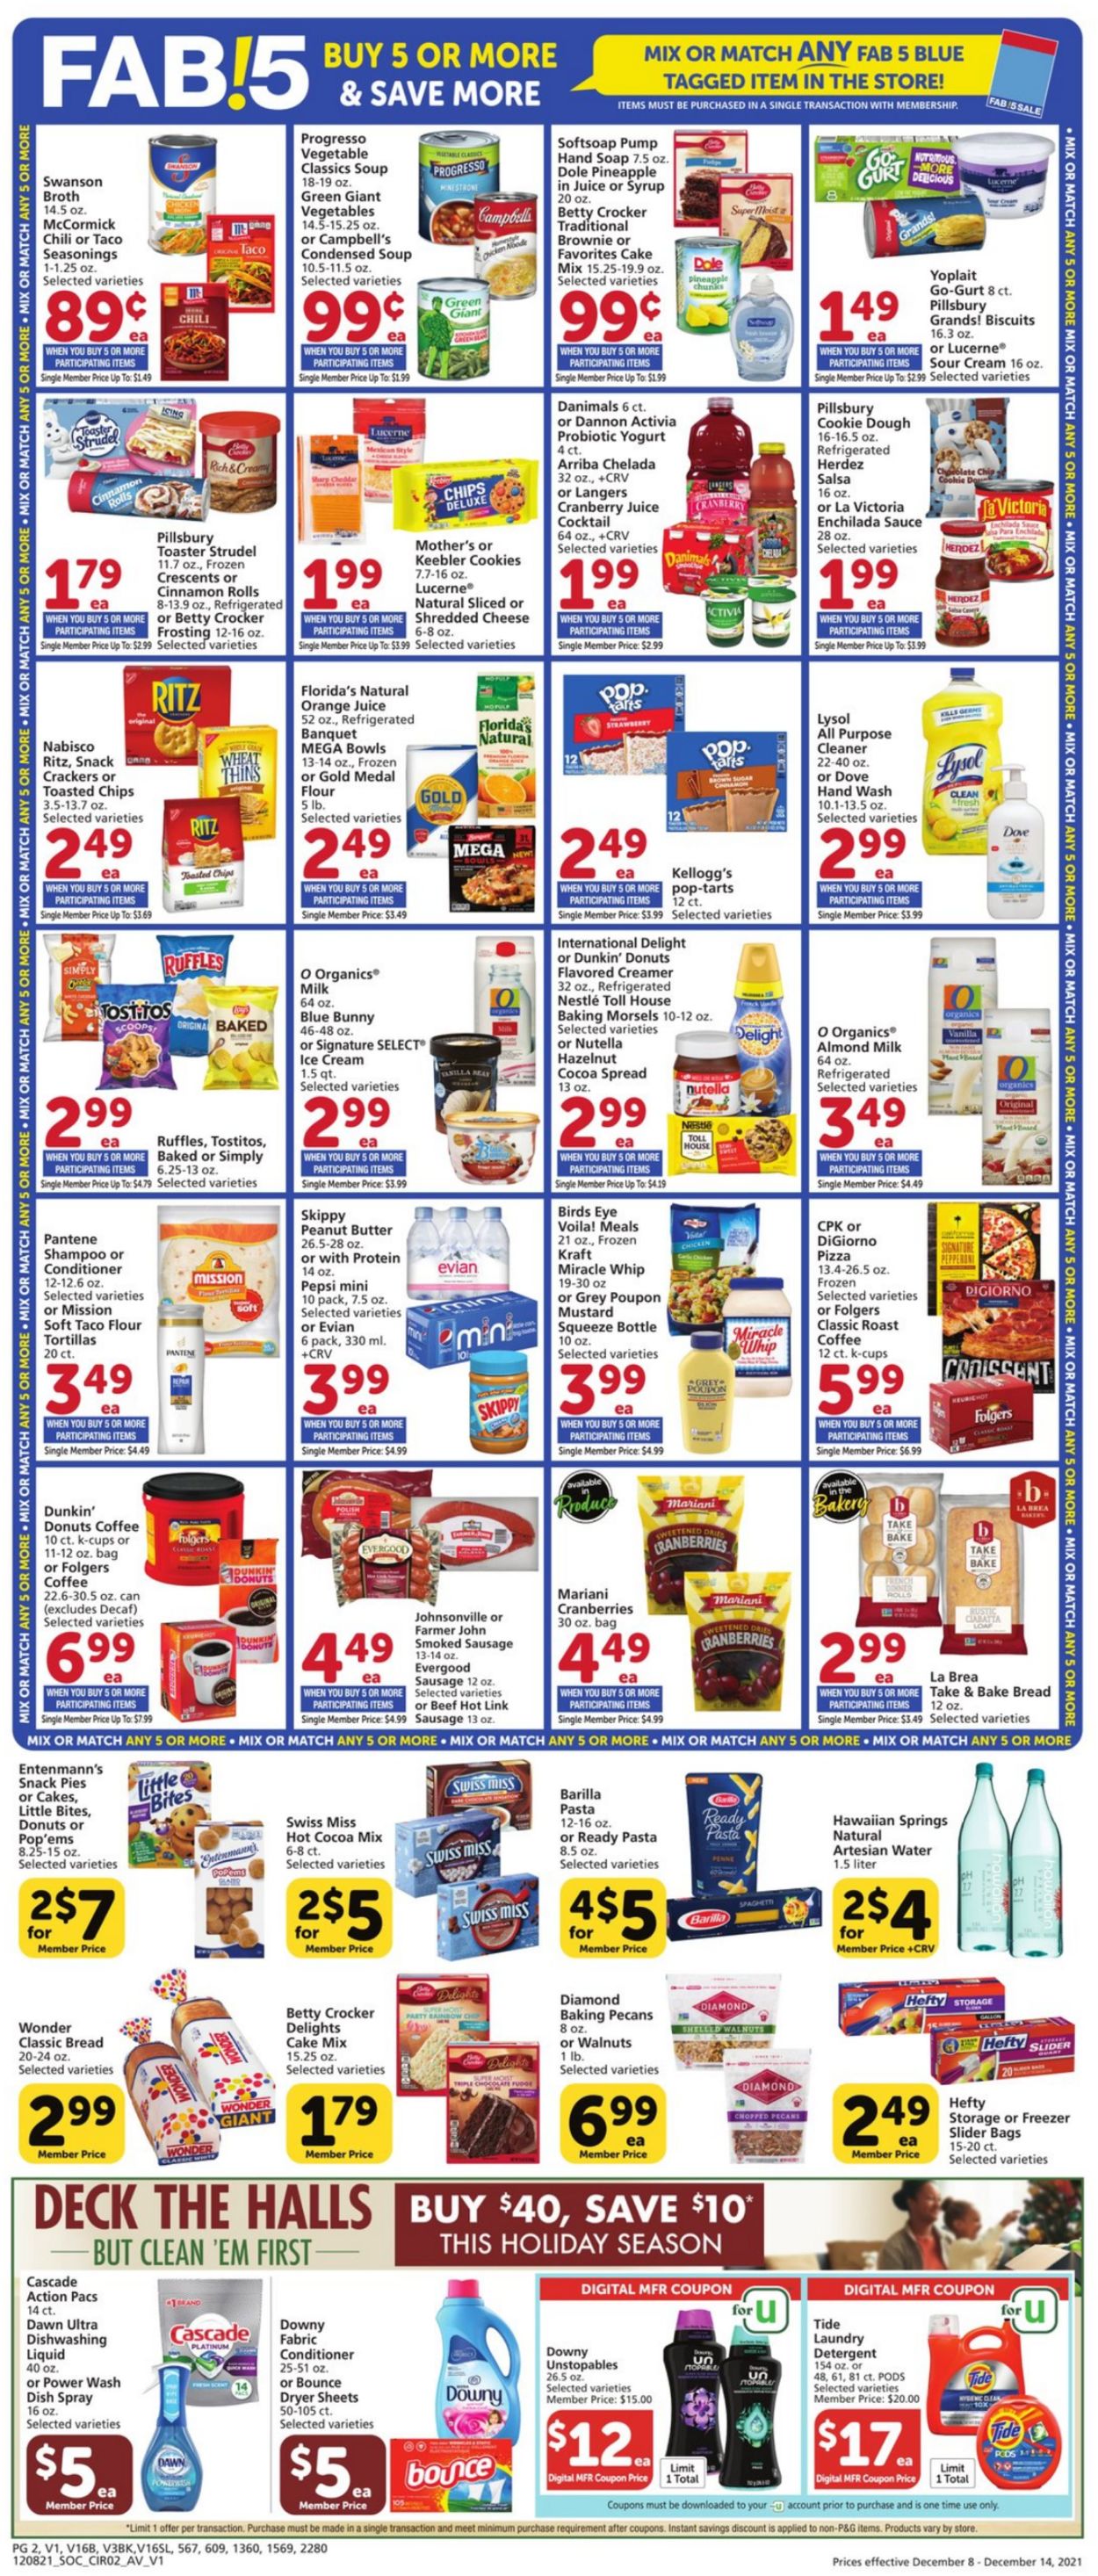 Vons Ad from 12/08/2021